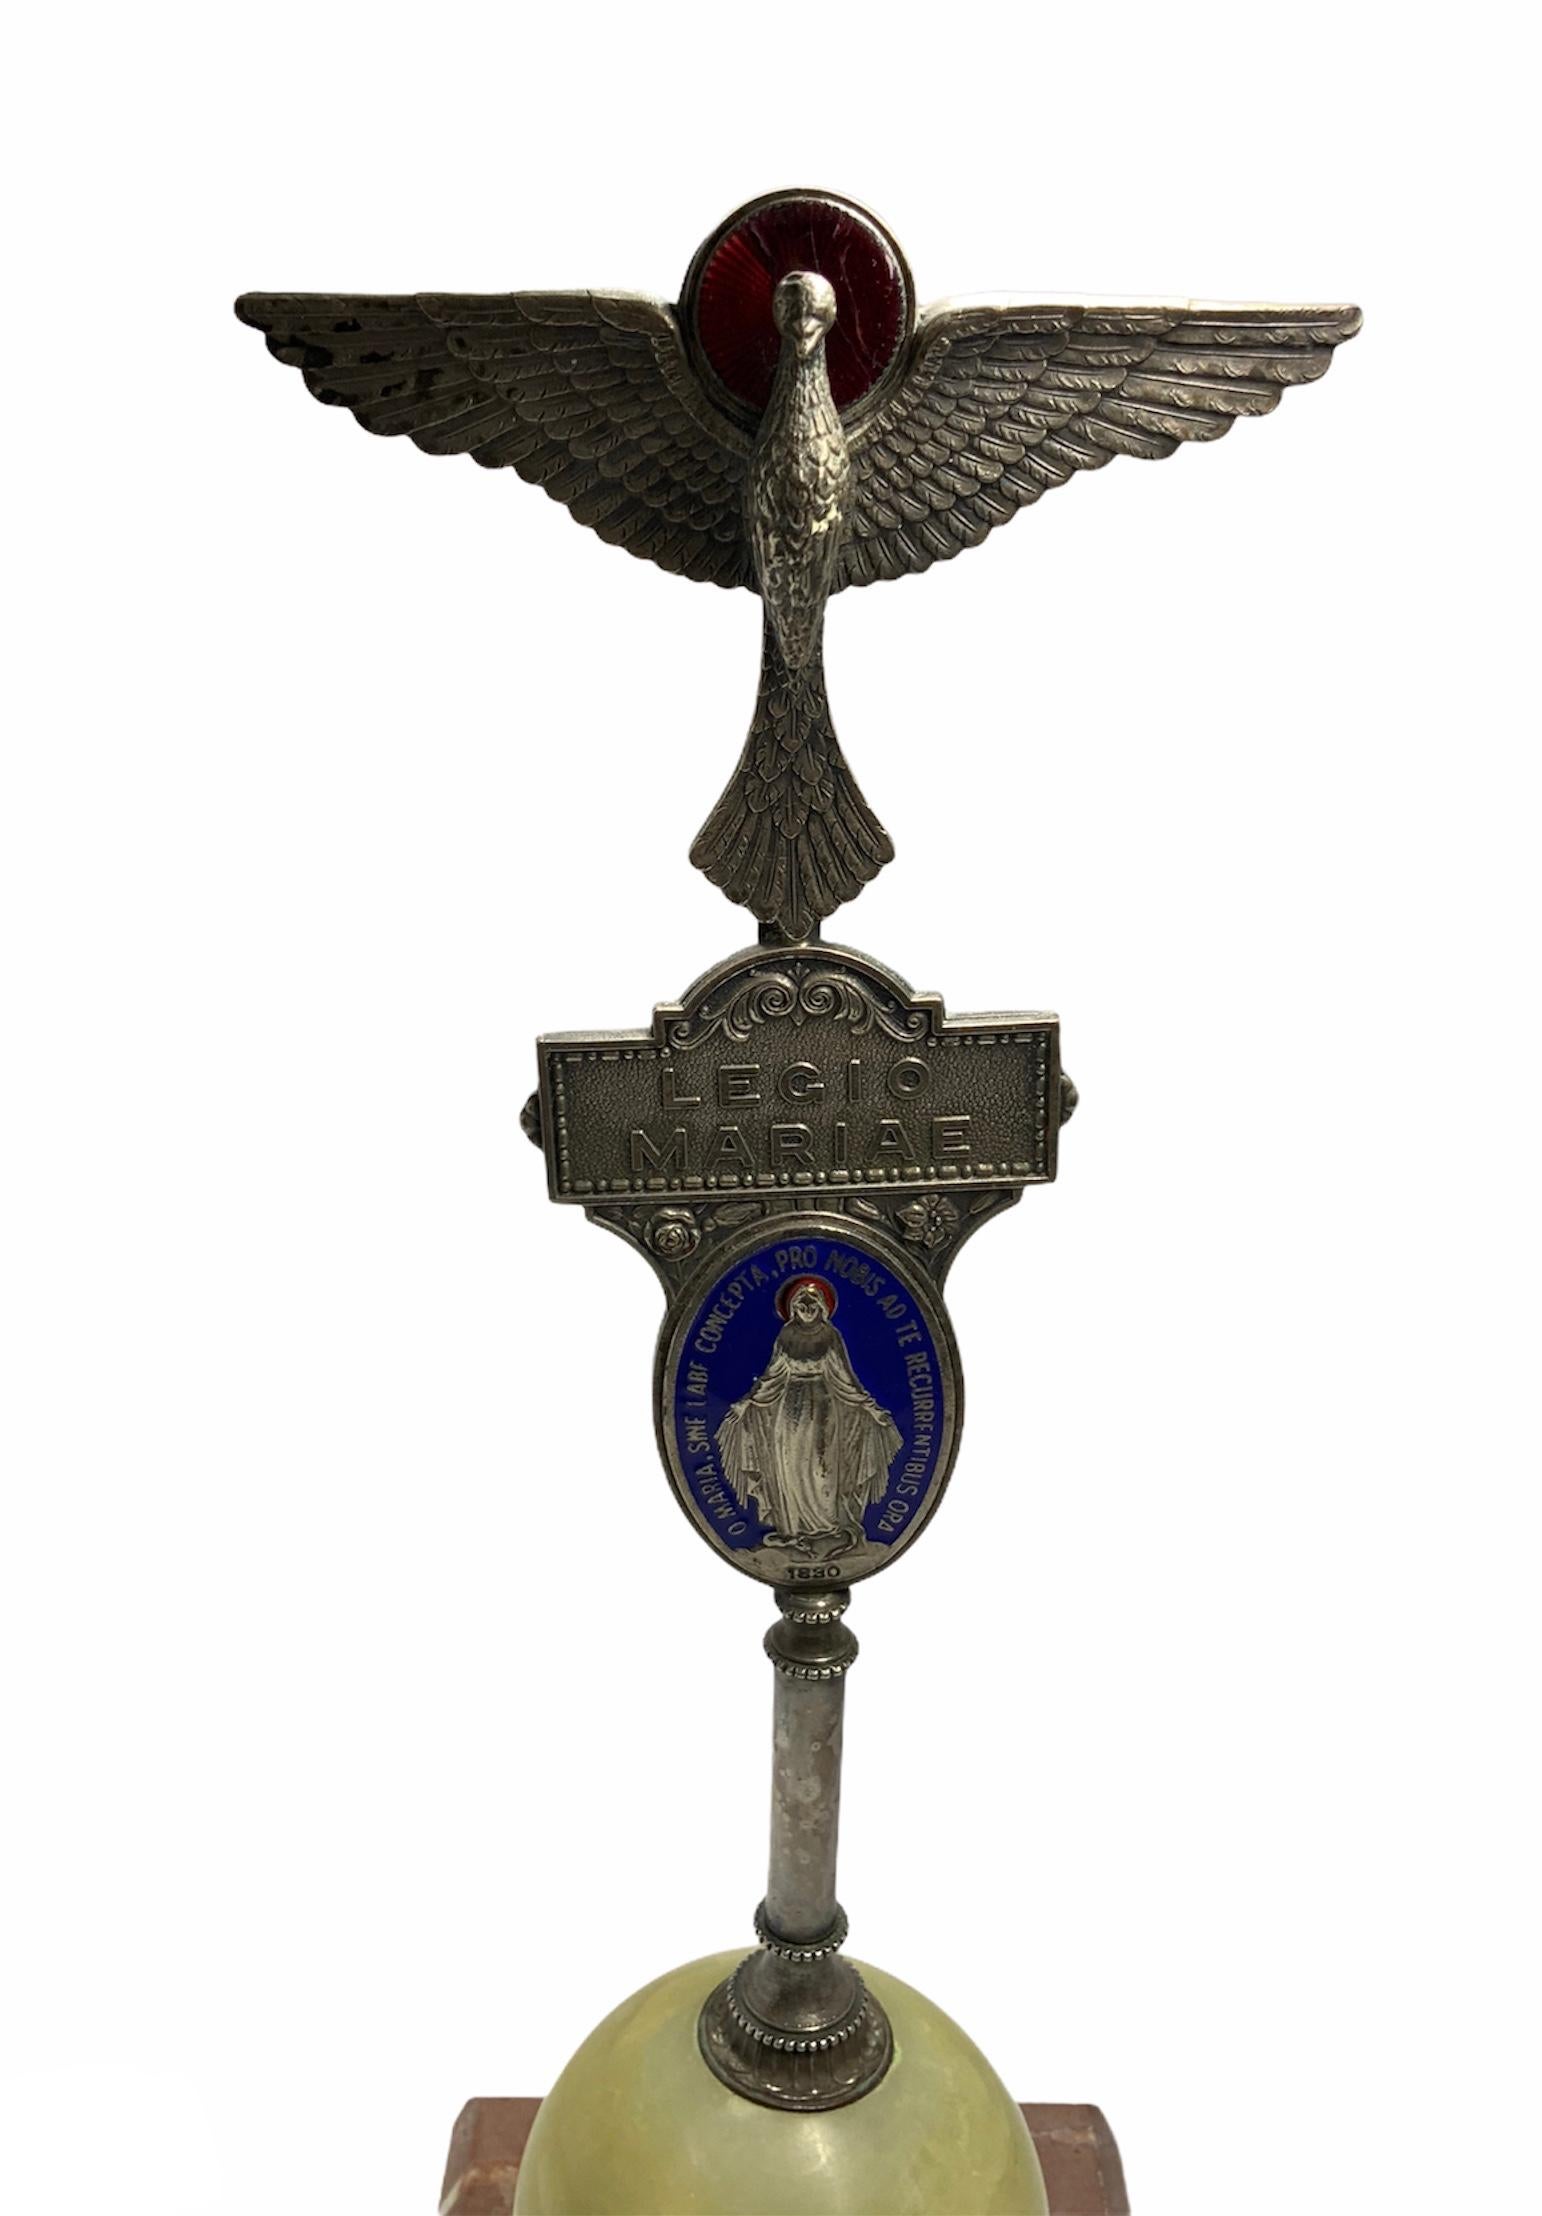 This is a Legio Mariae statue composed of an open winged silver tone dove (representing the Holy Spirit) with red enamel halo. Below it, there is a silver plaque with the name Legio Mariae written and then an oval silver and blue enamel cameo of the